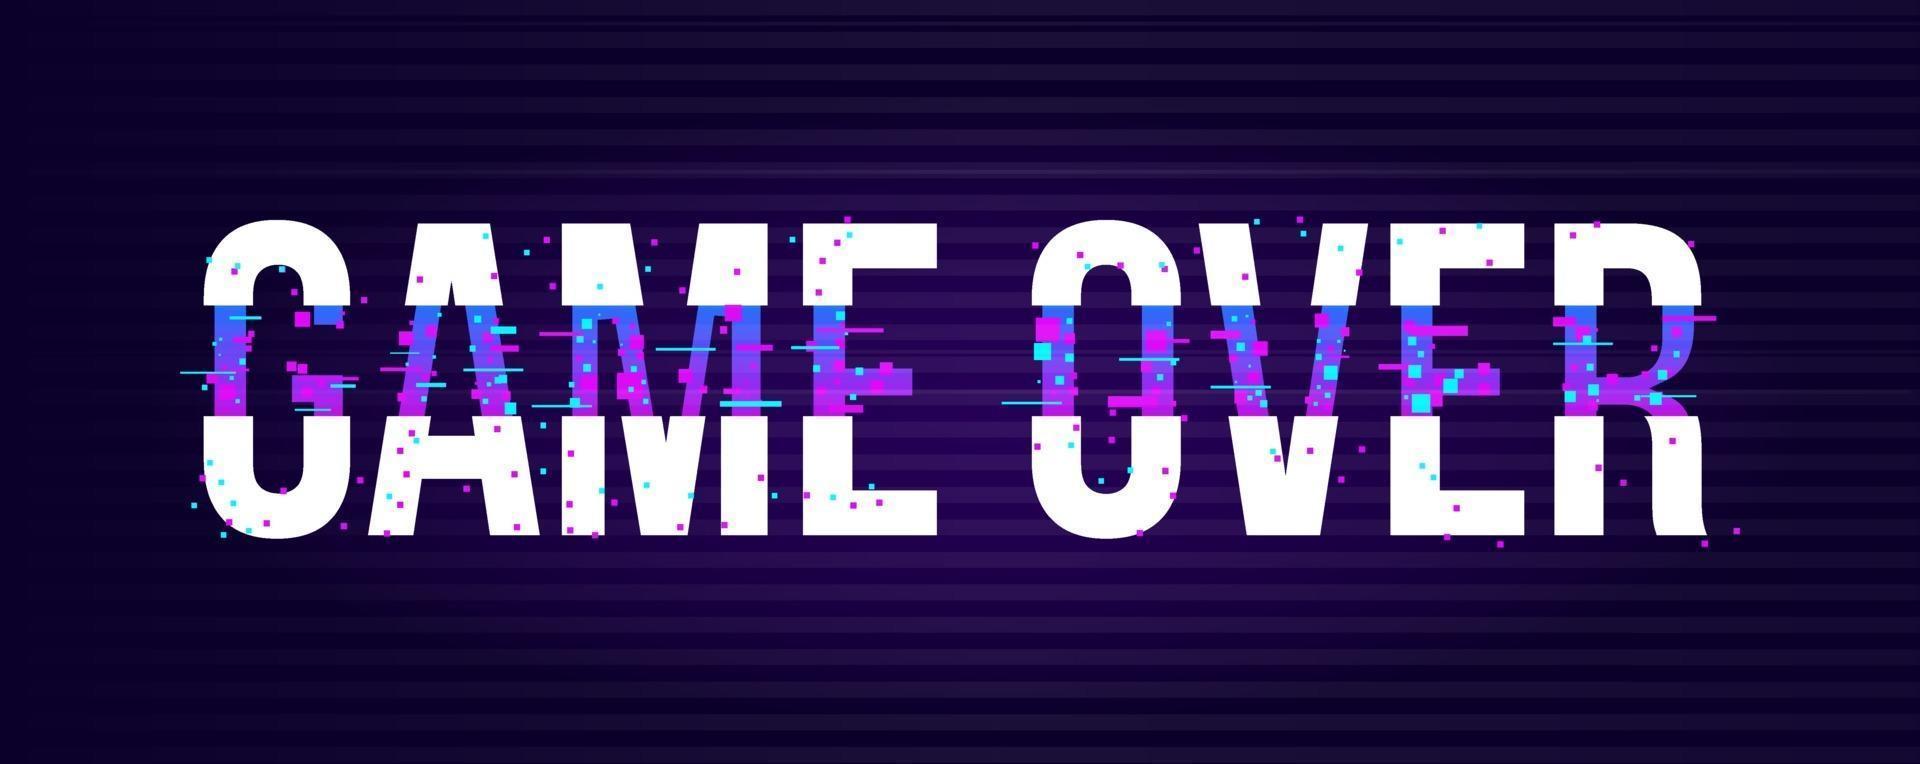 Game over banner for games with glitch effect in pixel style. Neon light on text. Vector illustration design.